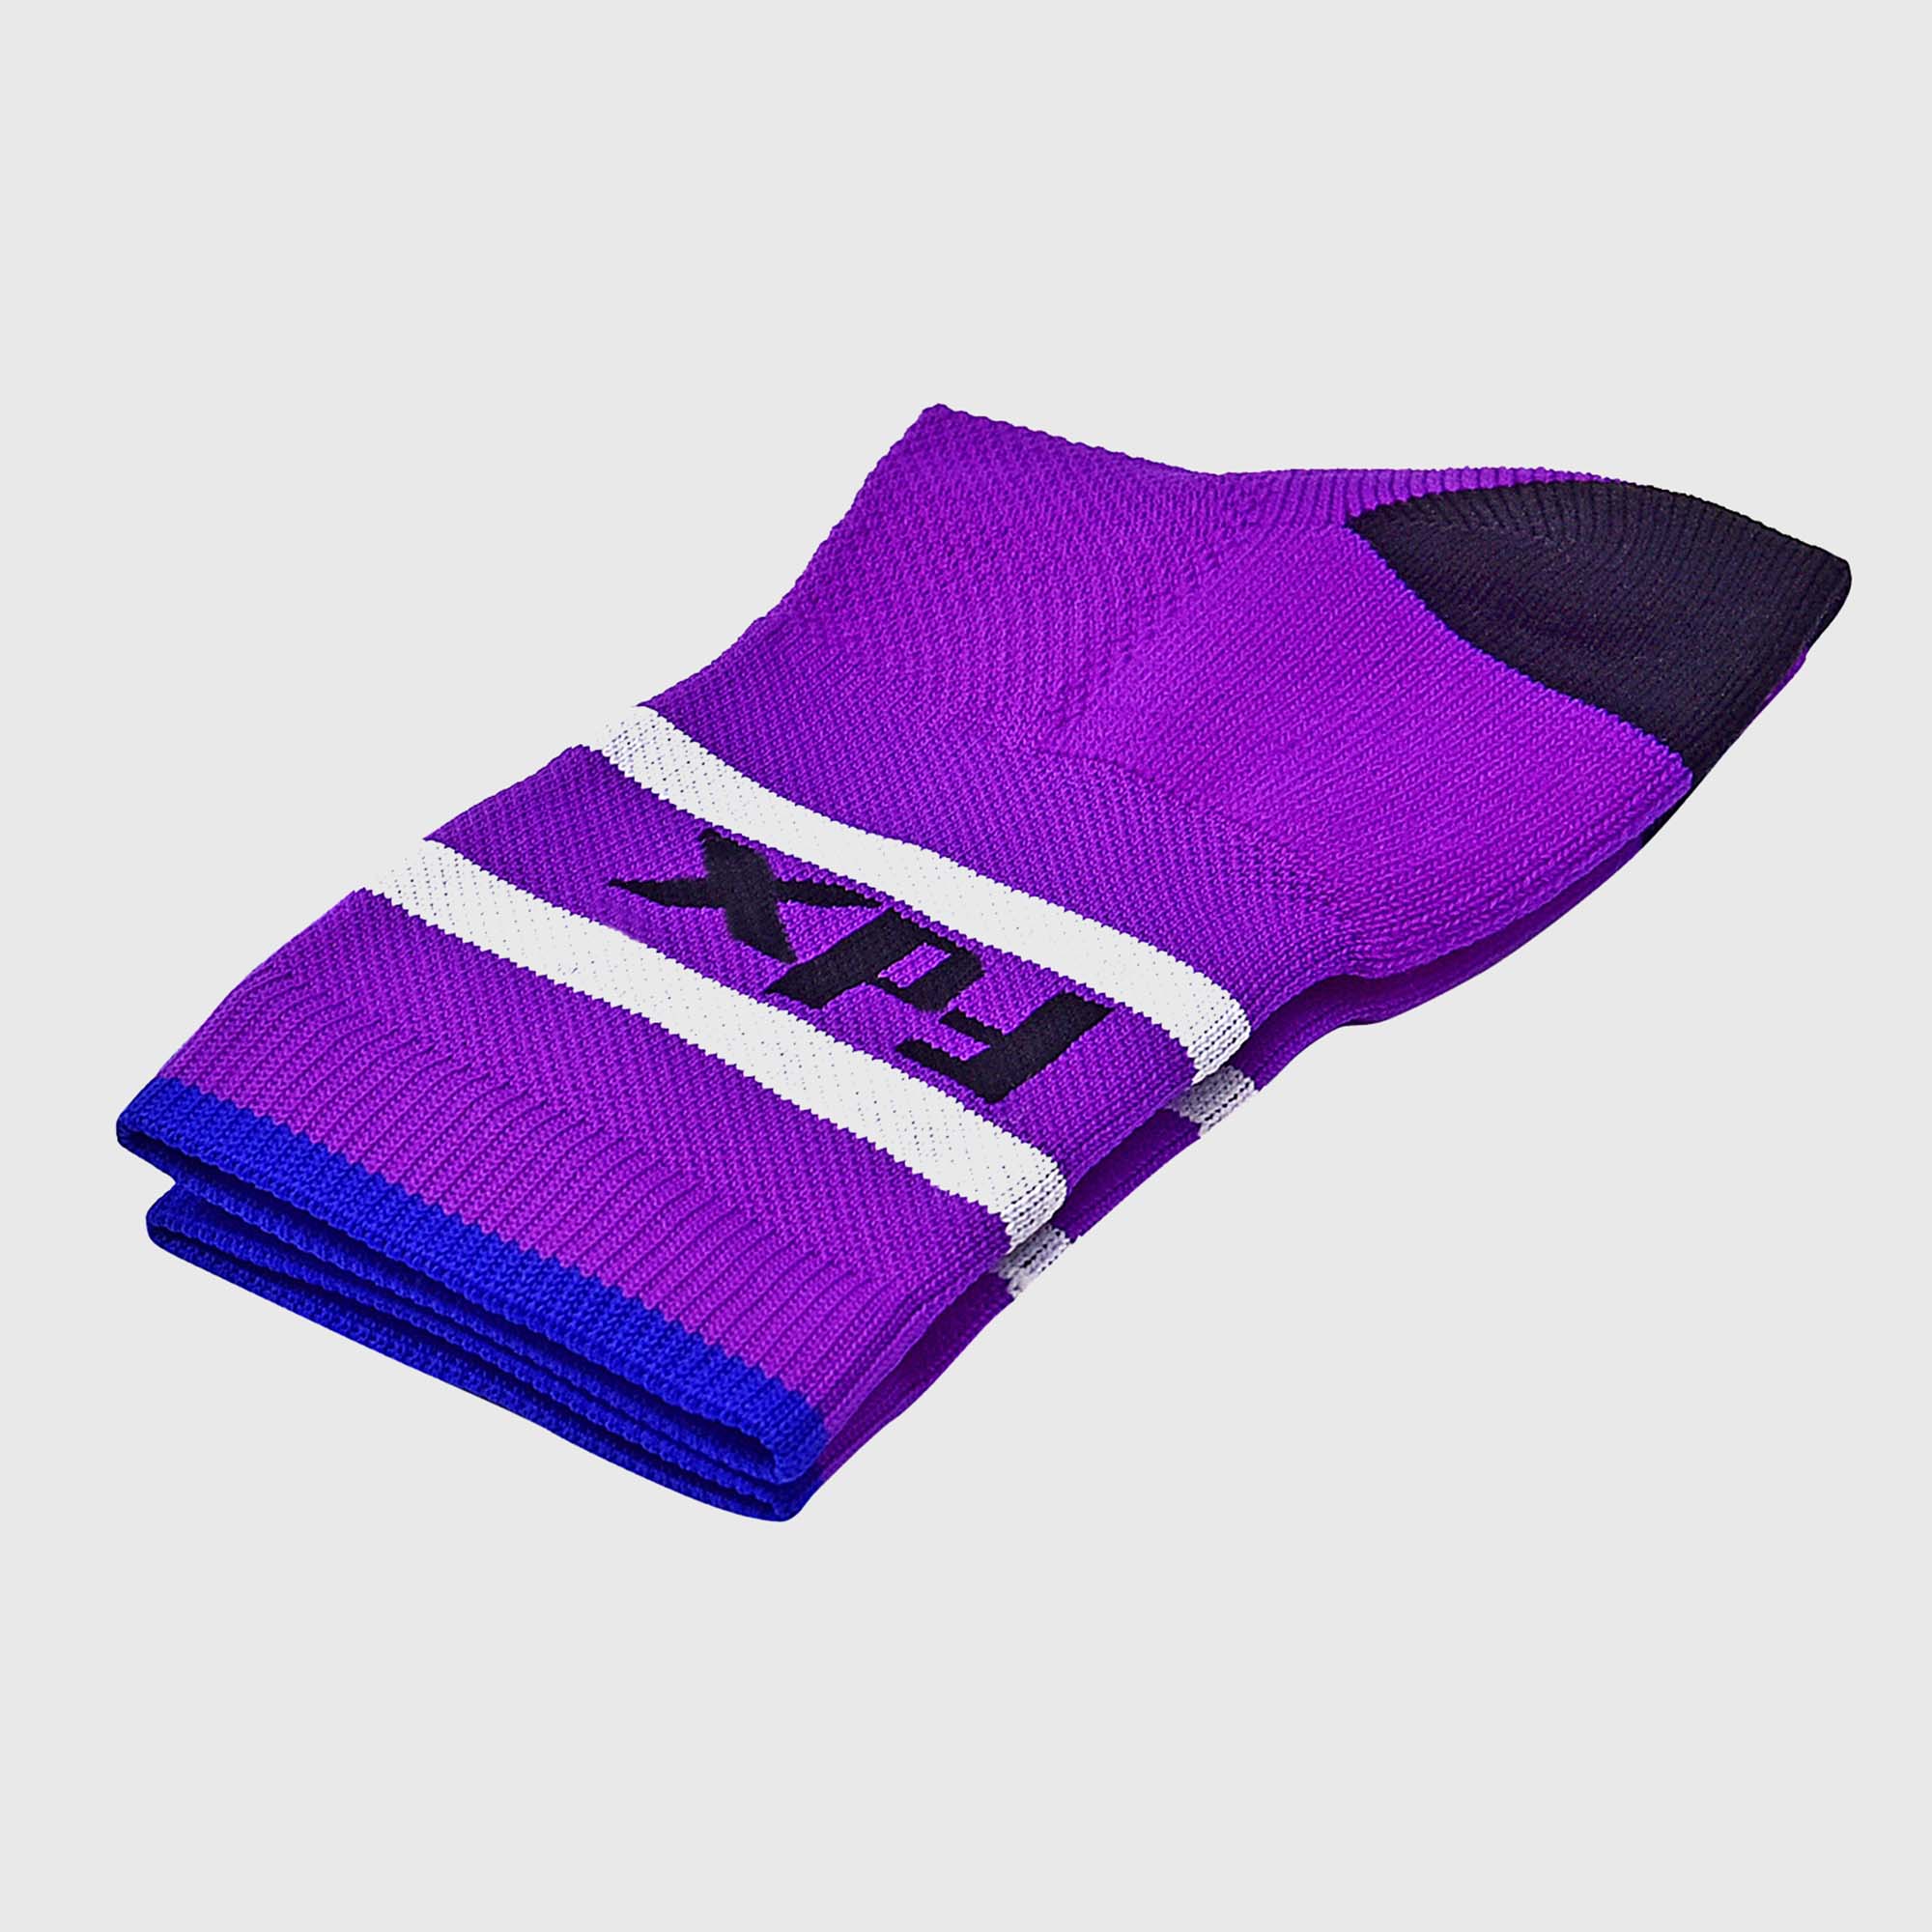 Fdx Purple Compression Socks for Cycling & Running